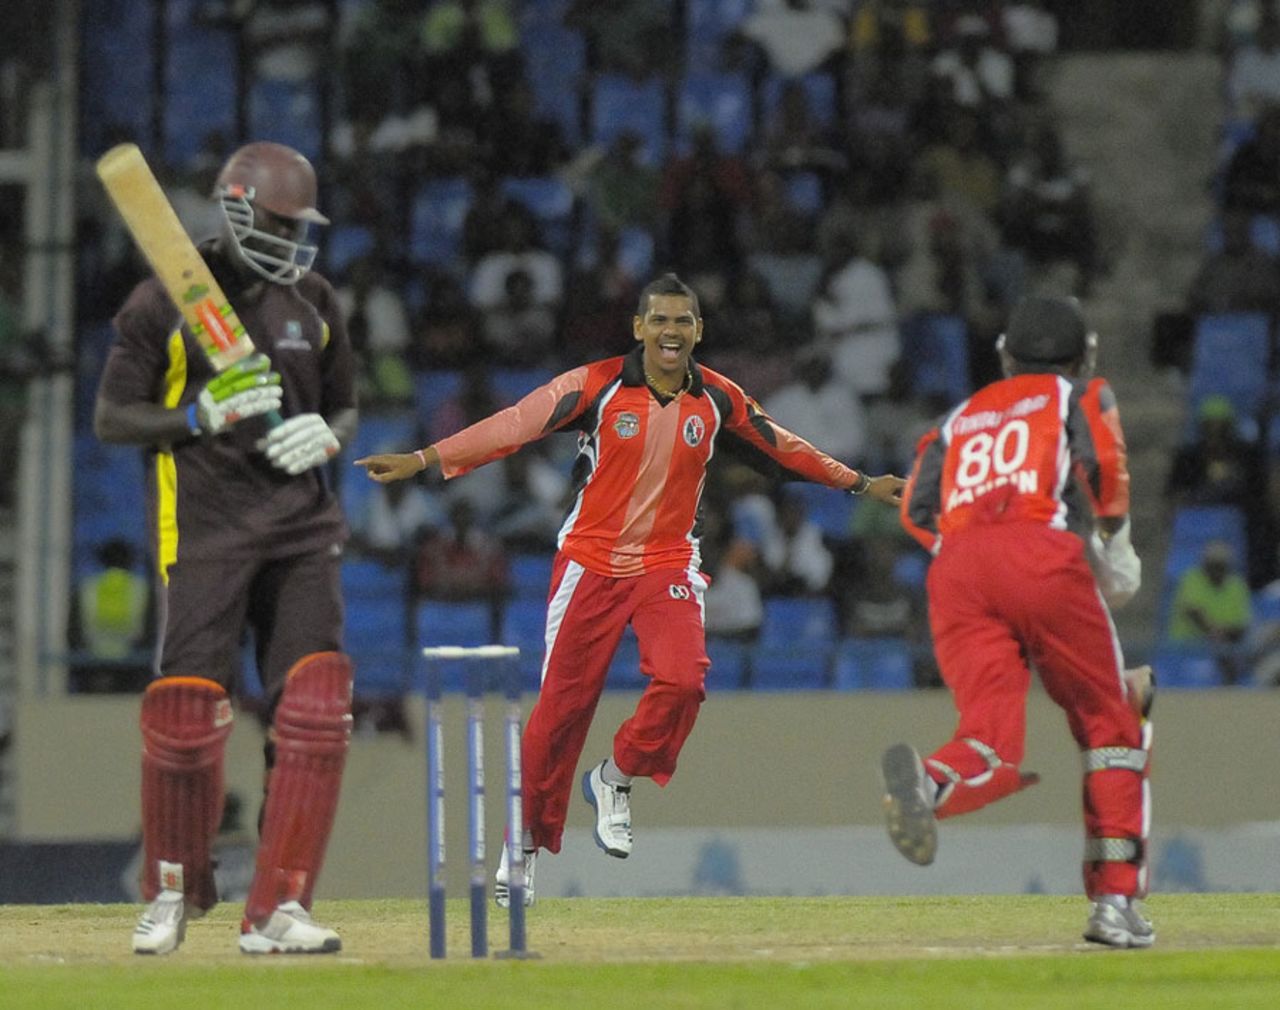 Sunil Narine claimed four wickets in an over, Leeward Islands v Trinidad & Tobago, Caribbean T20 2011-12, Group A match, North Sound, Antigua, January 11, 2012